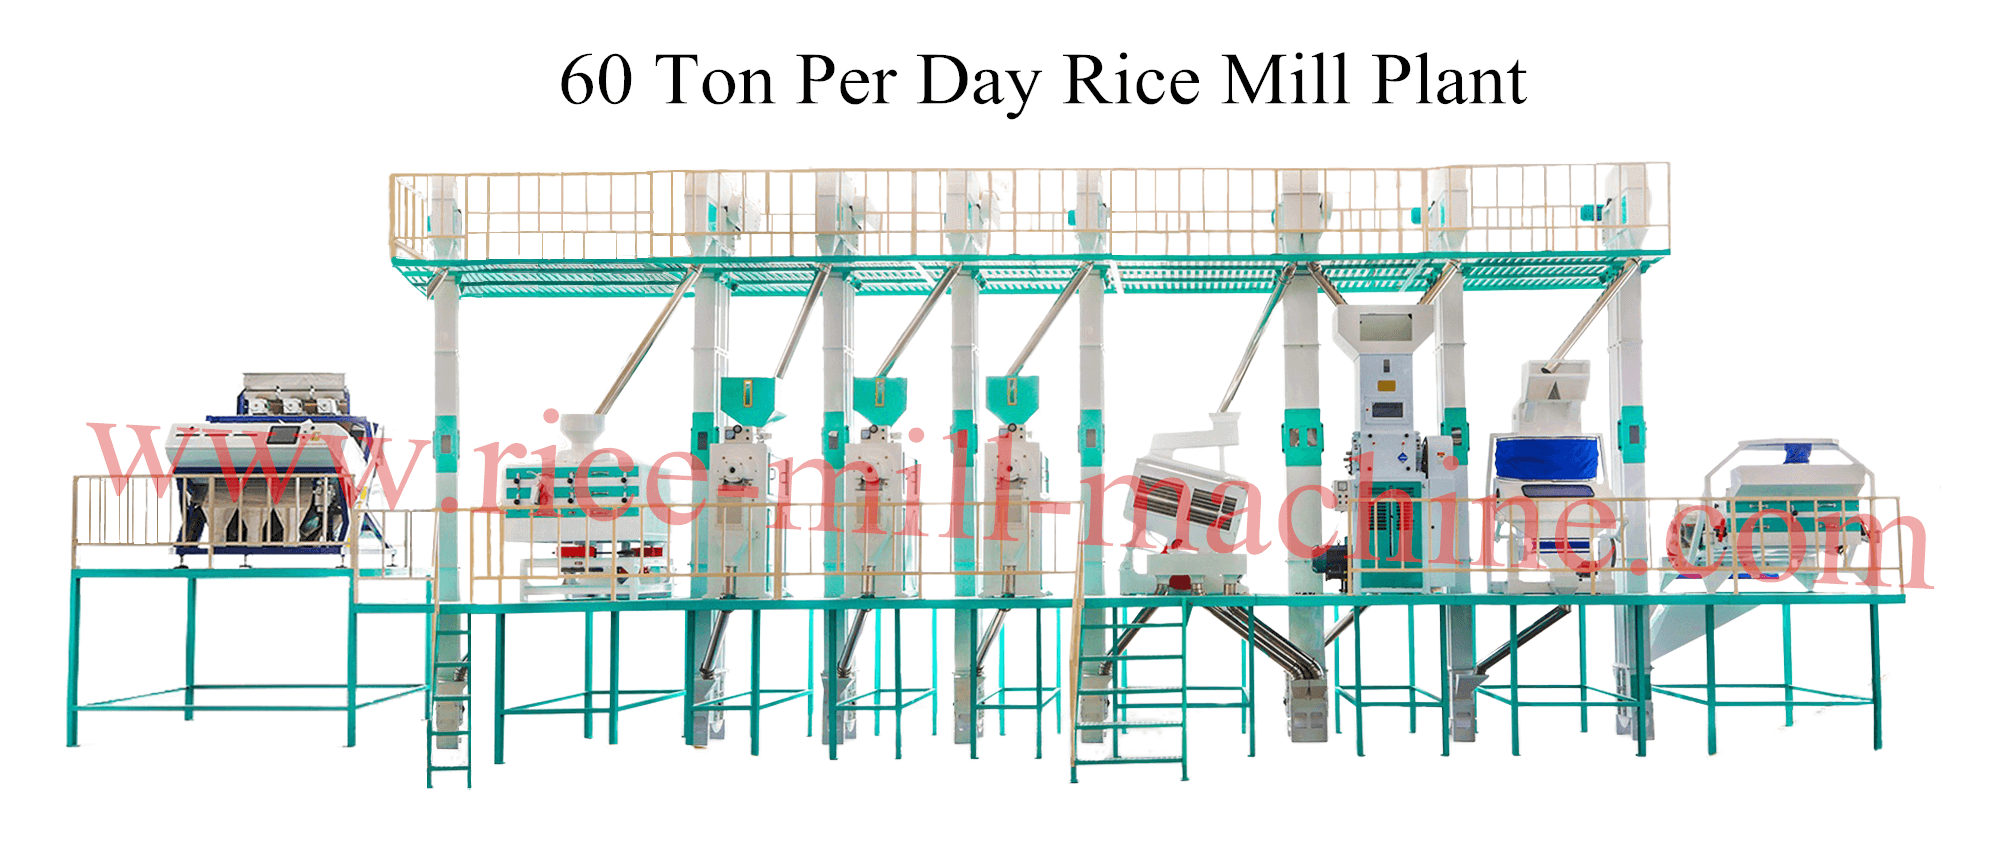 60 Ton Rice Mill Plant, 70 Ton Rice Mill - Factory Price - Rice Milling Machine